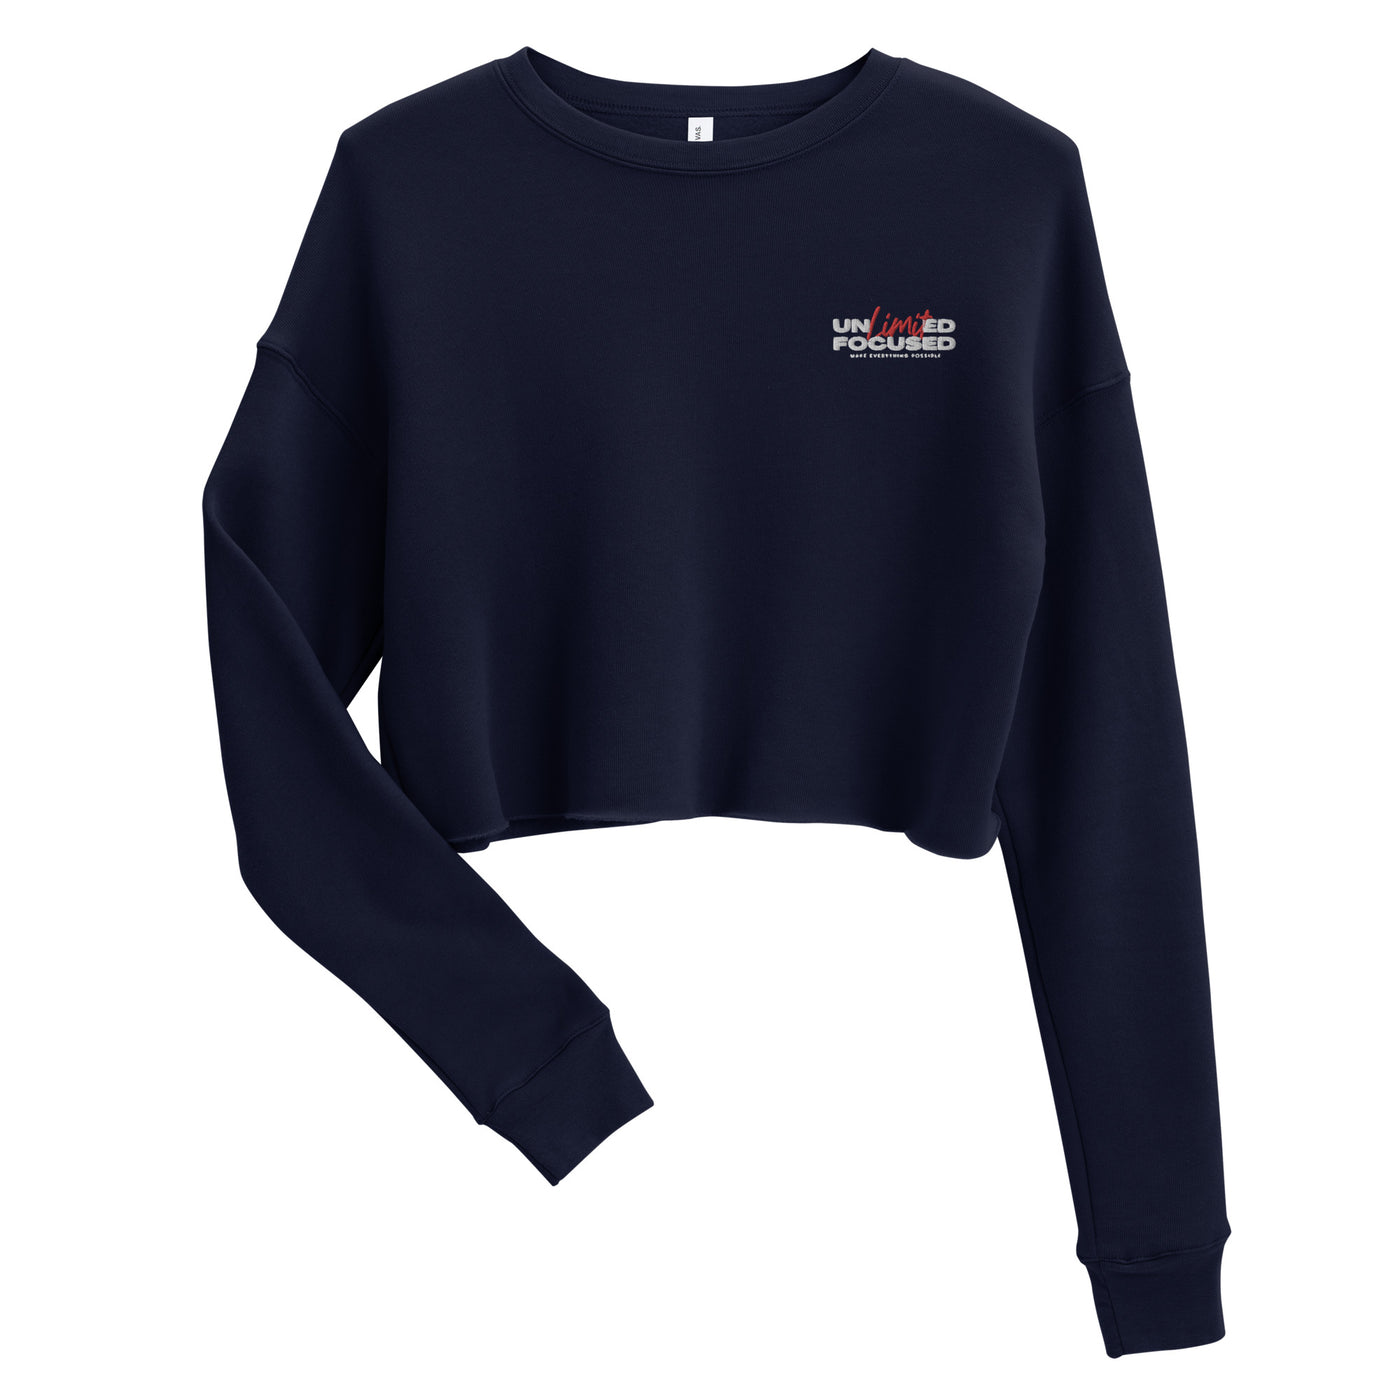 Women's Embroidered Navy Cropped Sweatshirt - Unlimited Focused